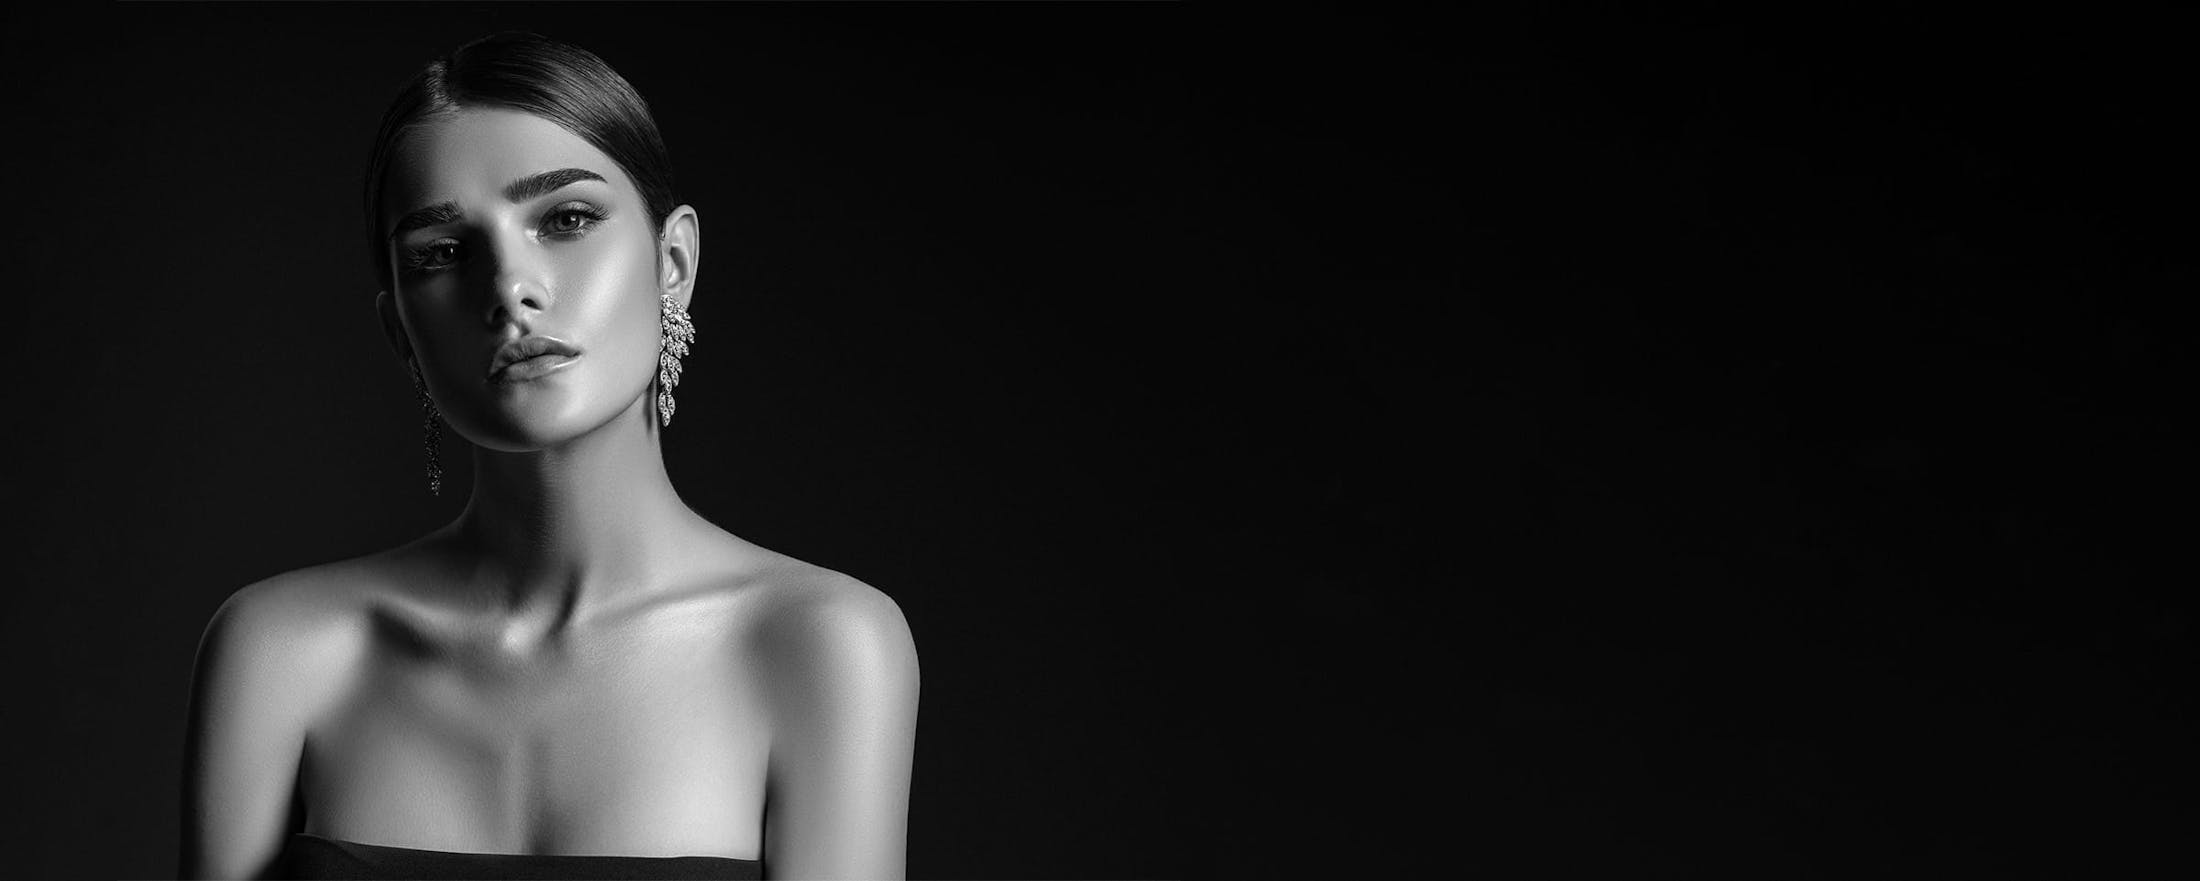 woman with slicked back hair and large earrings